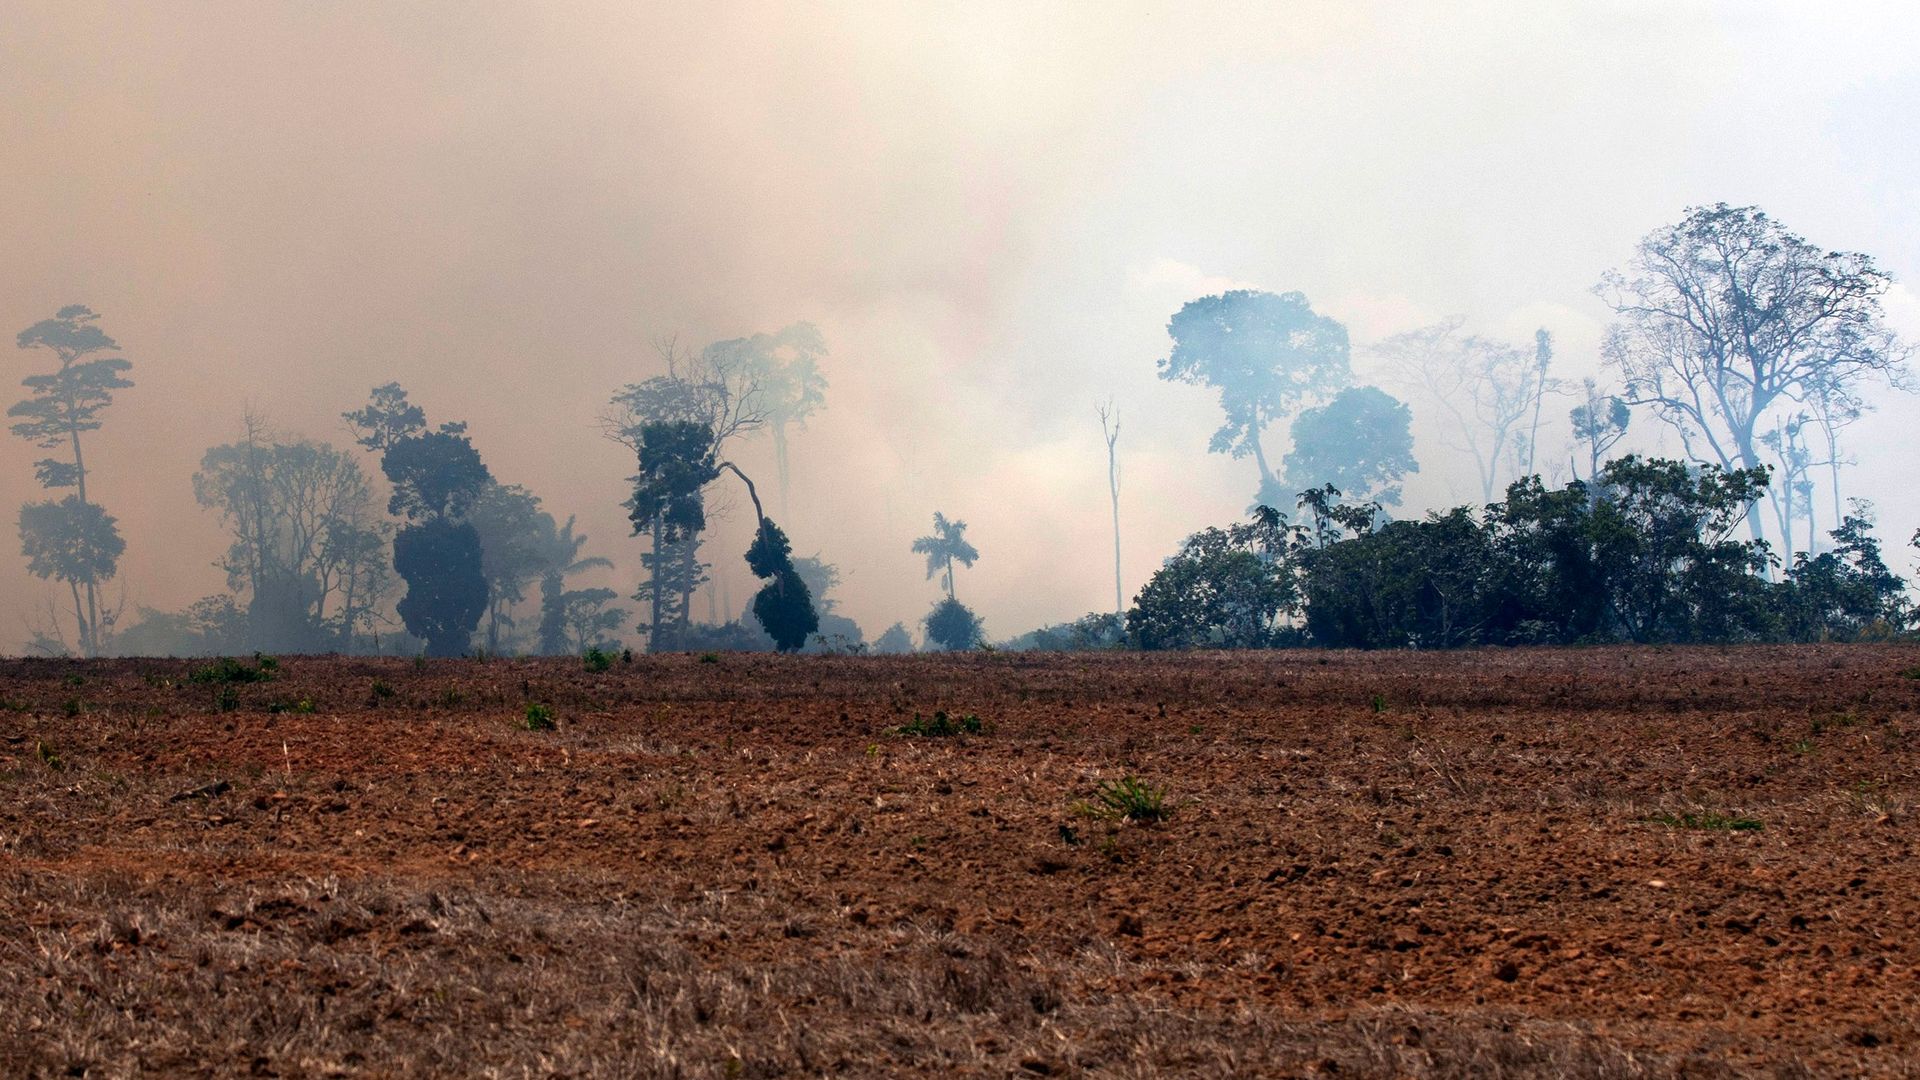 A smoke cloud is seen over a burnt area after a fire in the Amazon rainforest, in Novo Progresso, Para state, Brazil, on August 24, 2019. 